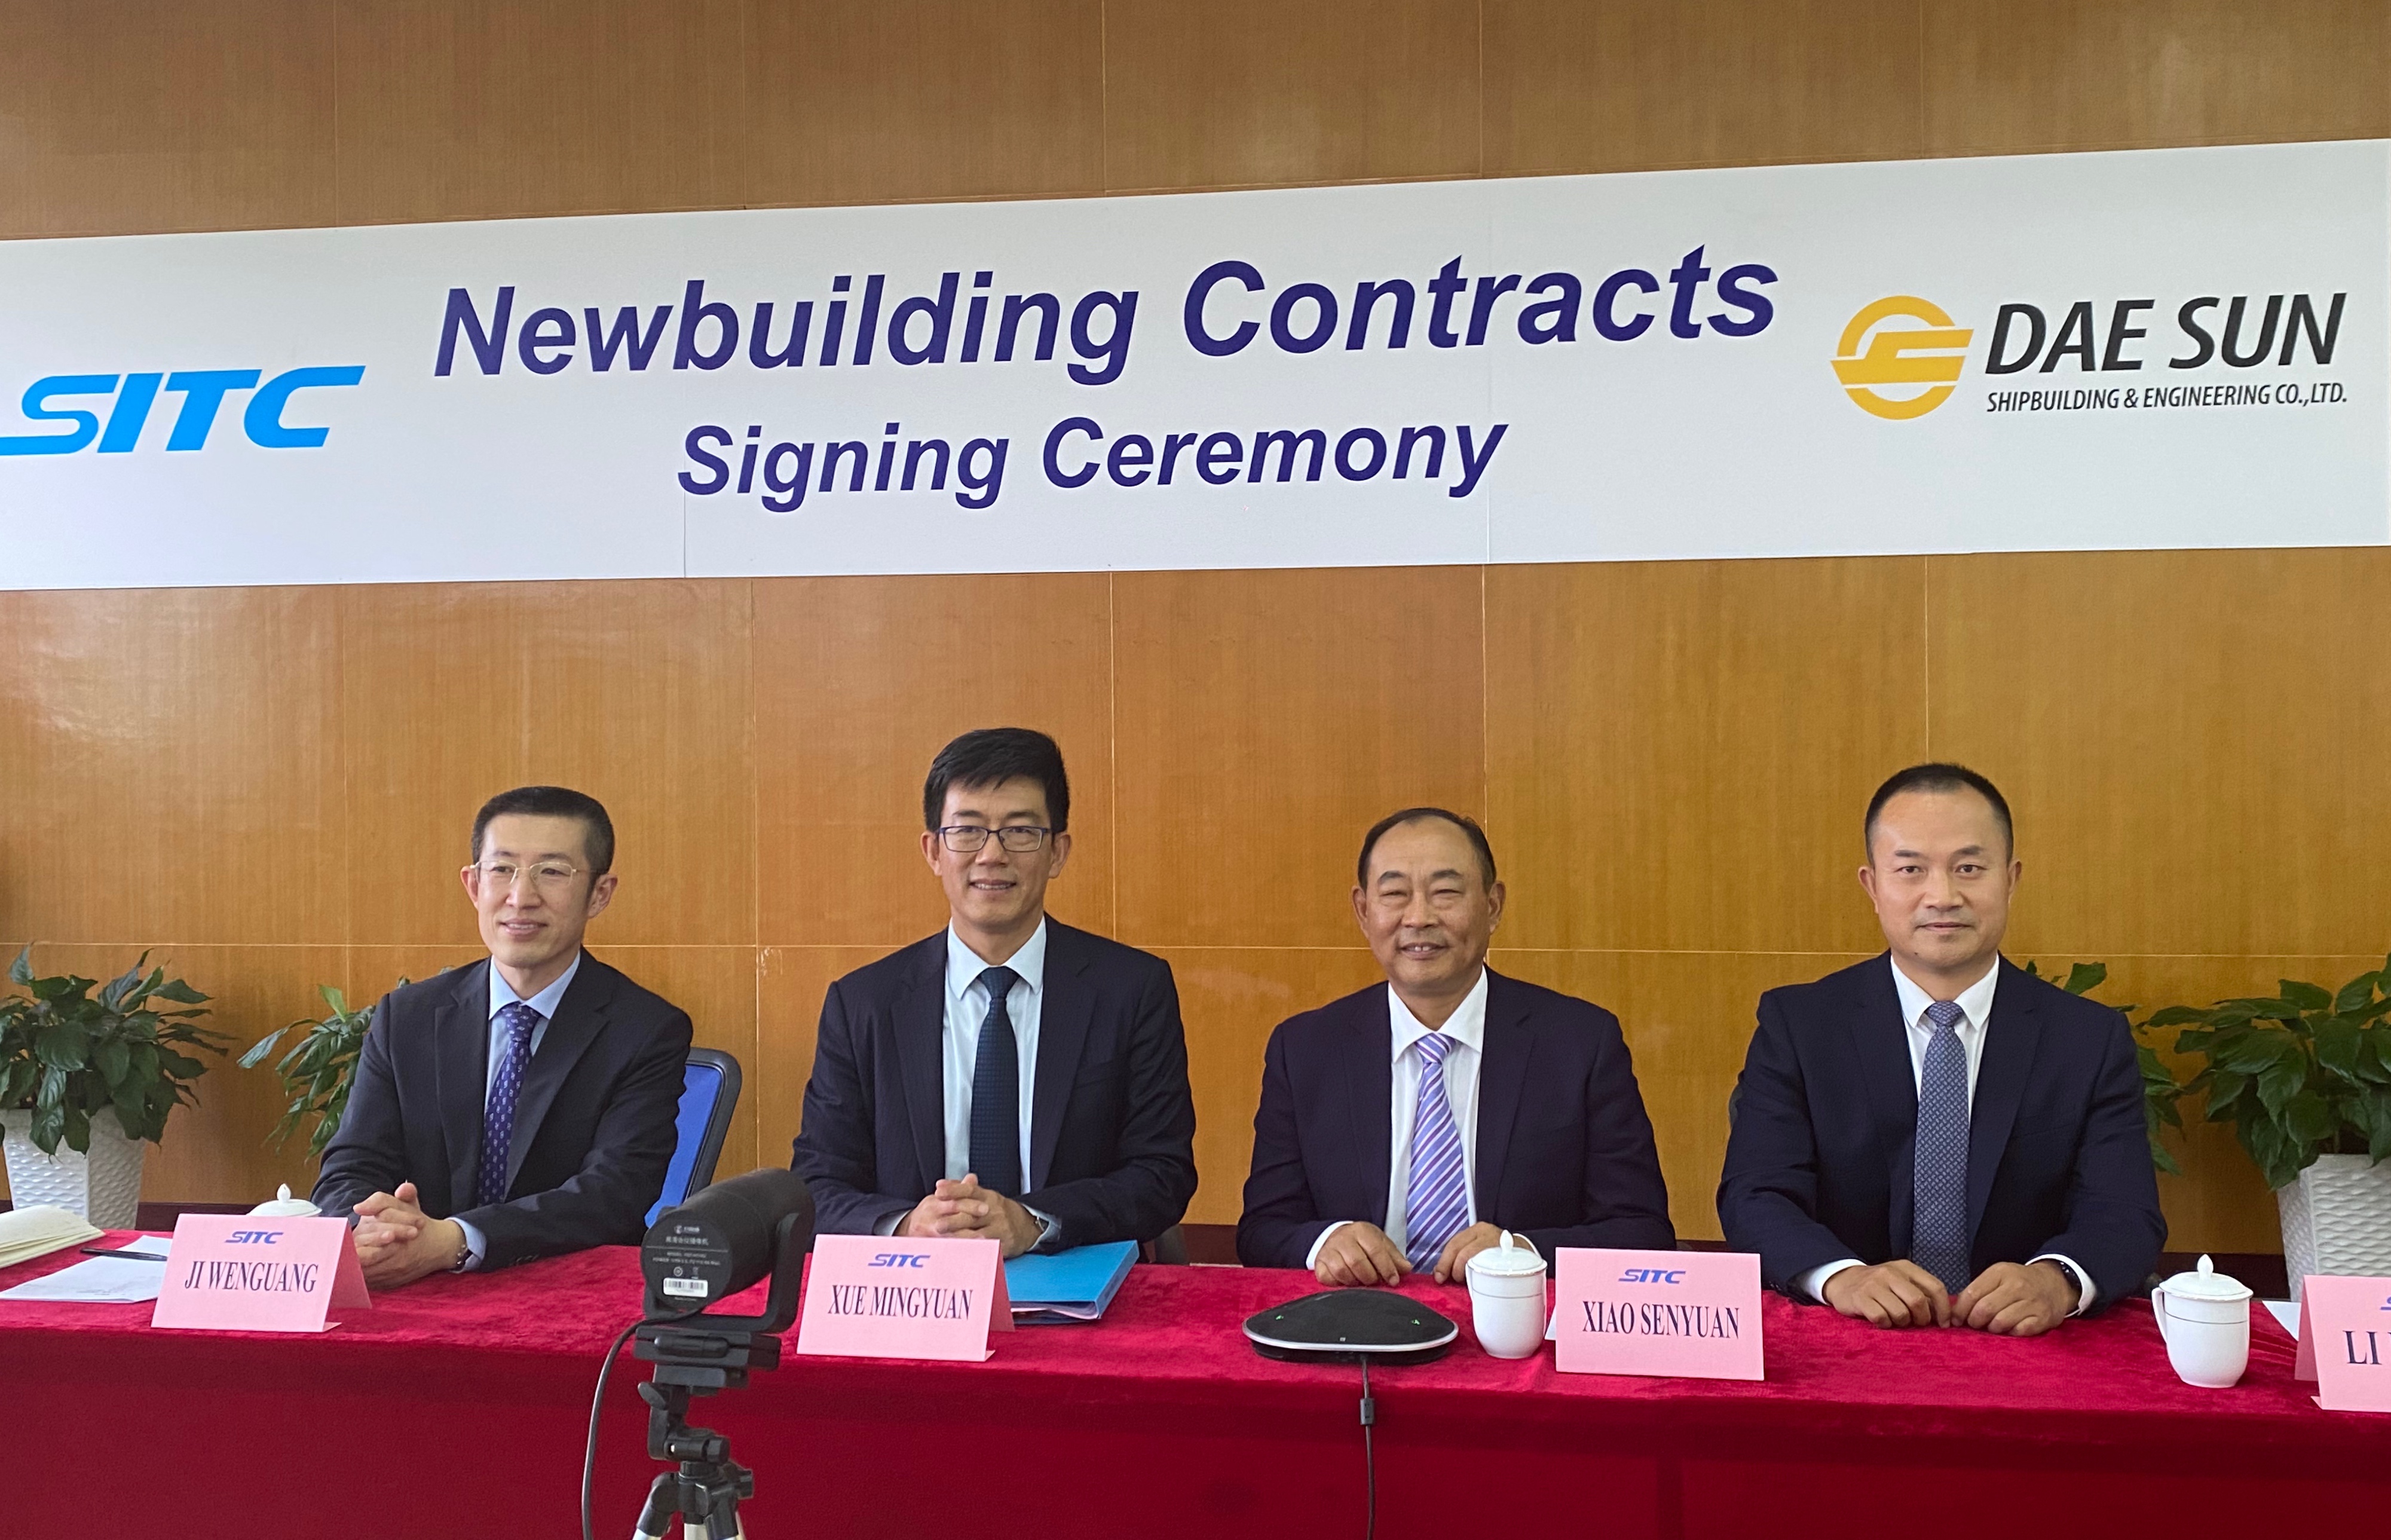 SITC International Cooperate with Dae Sun Shipbuilding, signing the Newbuilding Contracts